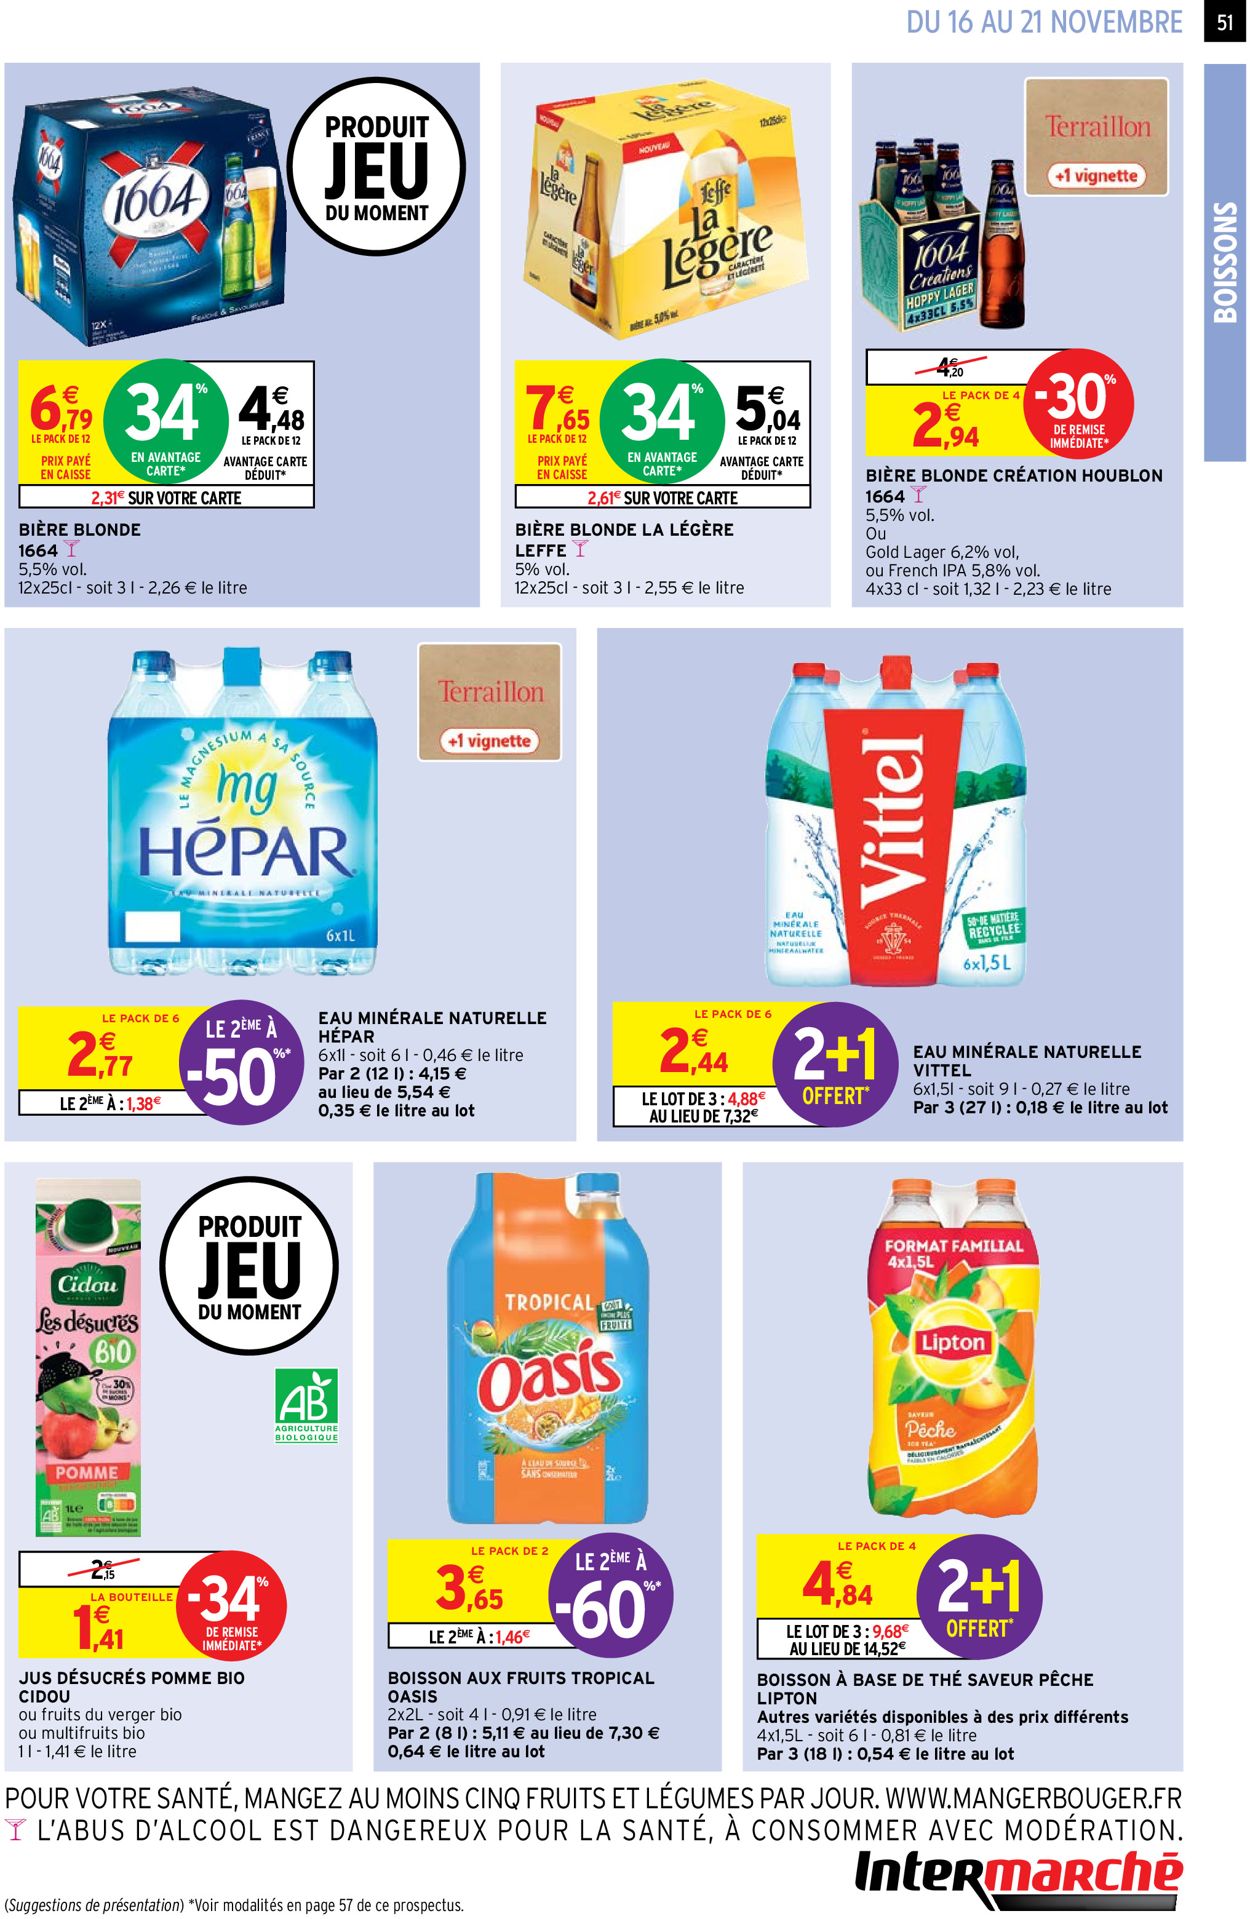 Intermarché  BLACK FRIDAY 2021 Catalogue - 16.11-21.11.2021 (Page 51)